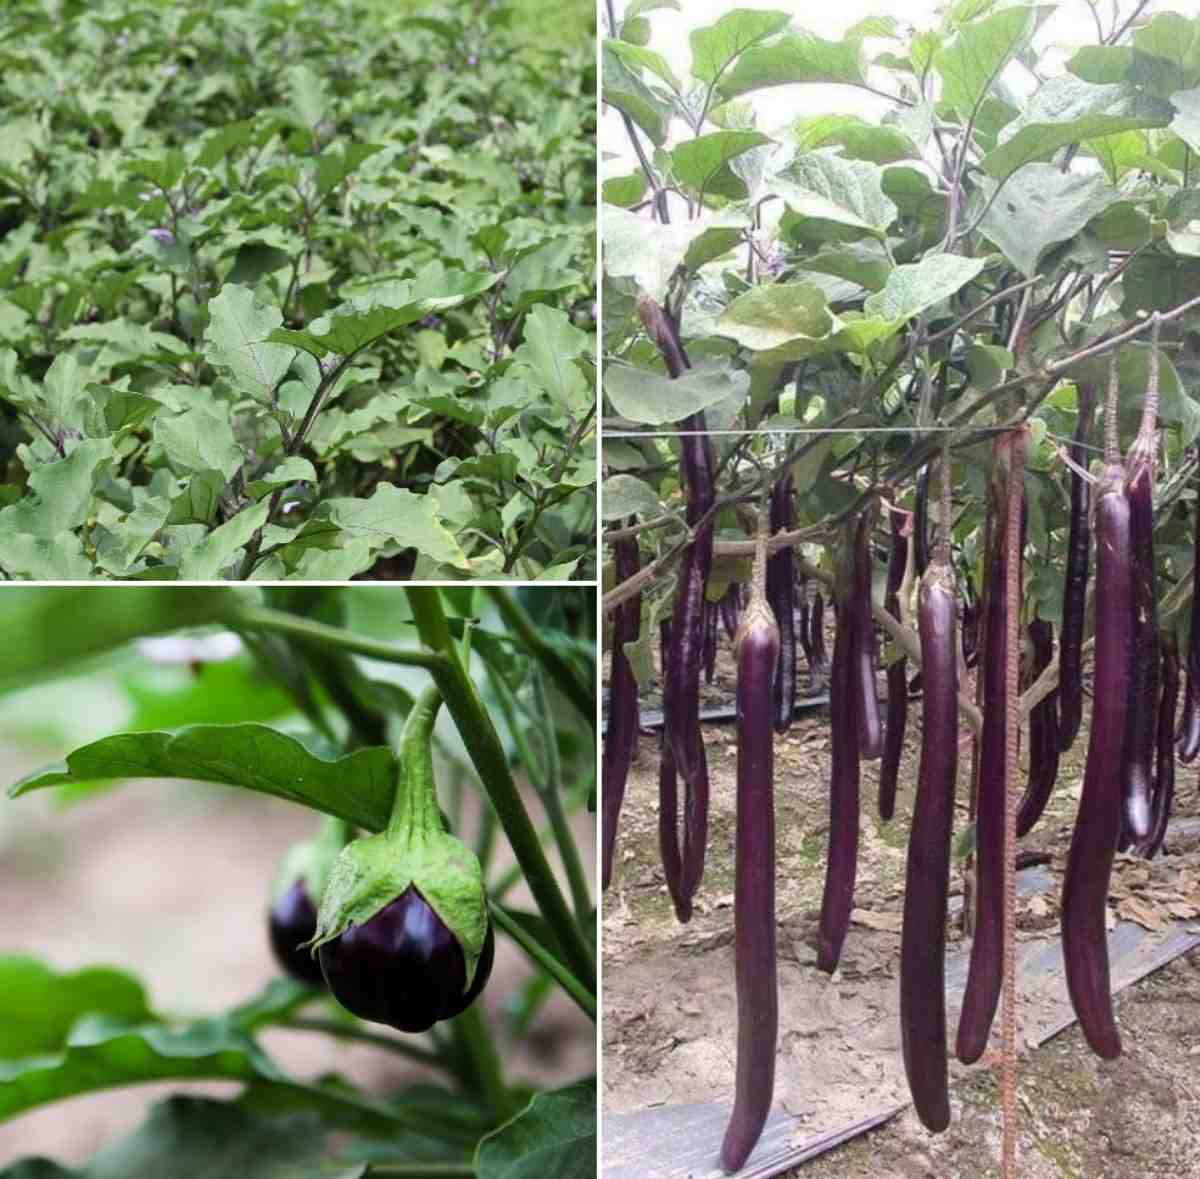 Soil requirement for growing Eggplant.